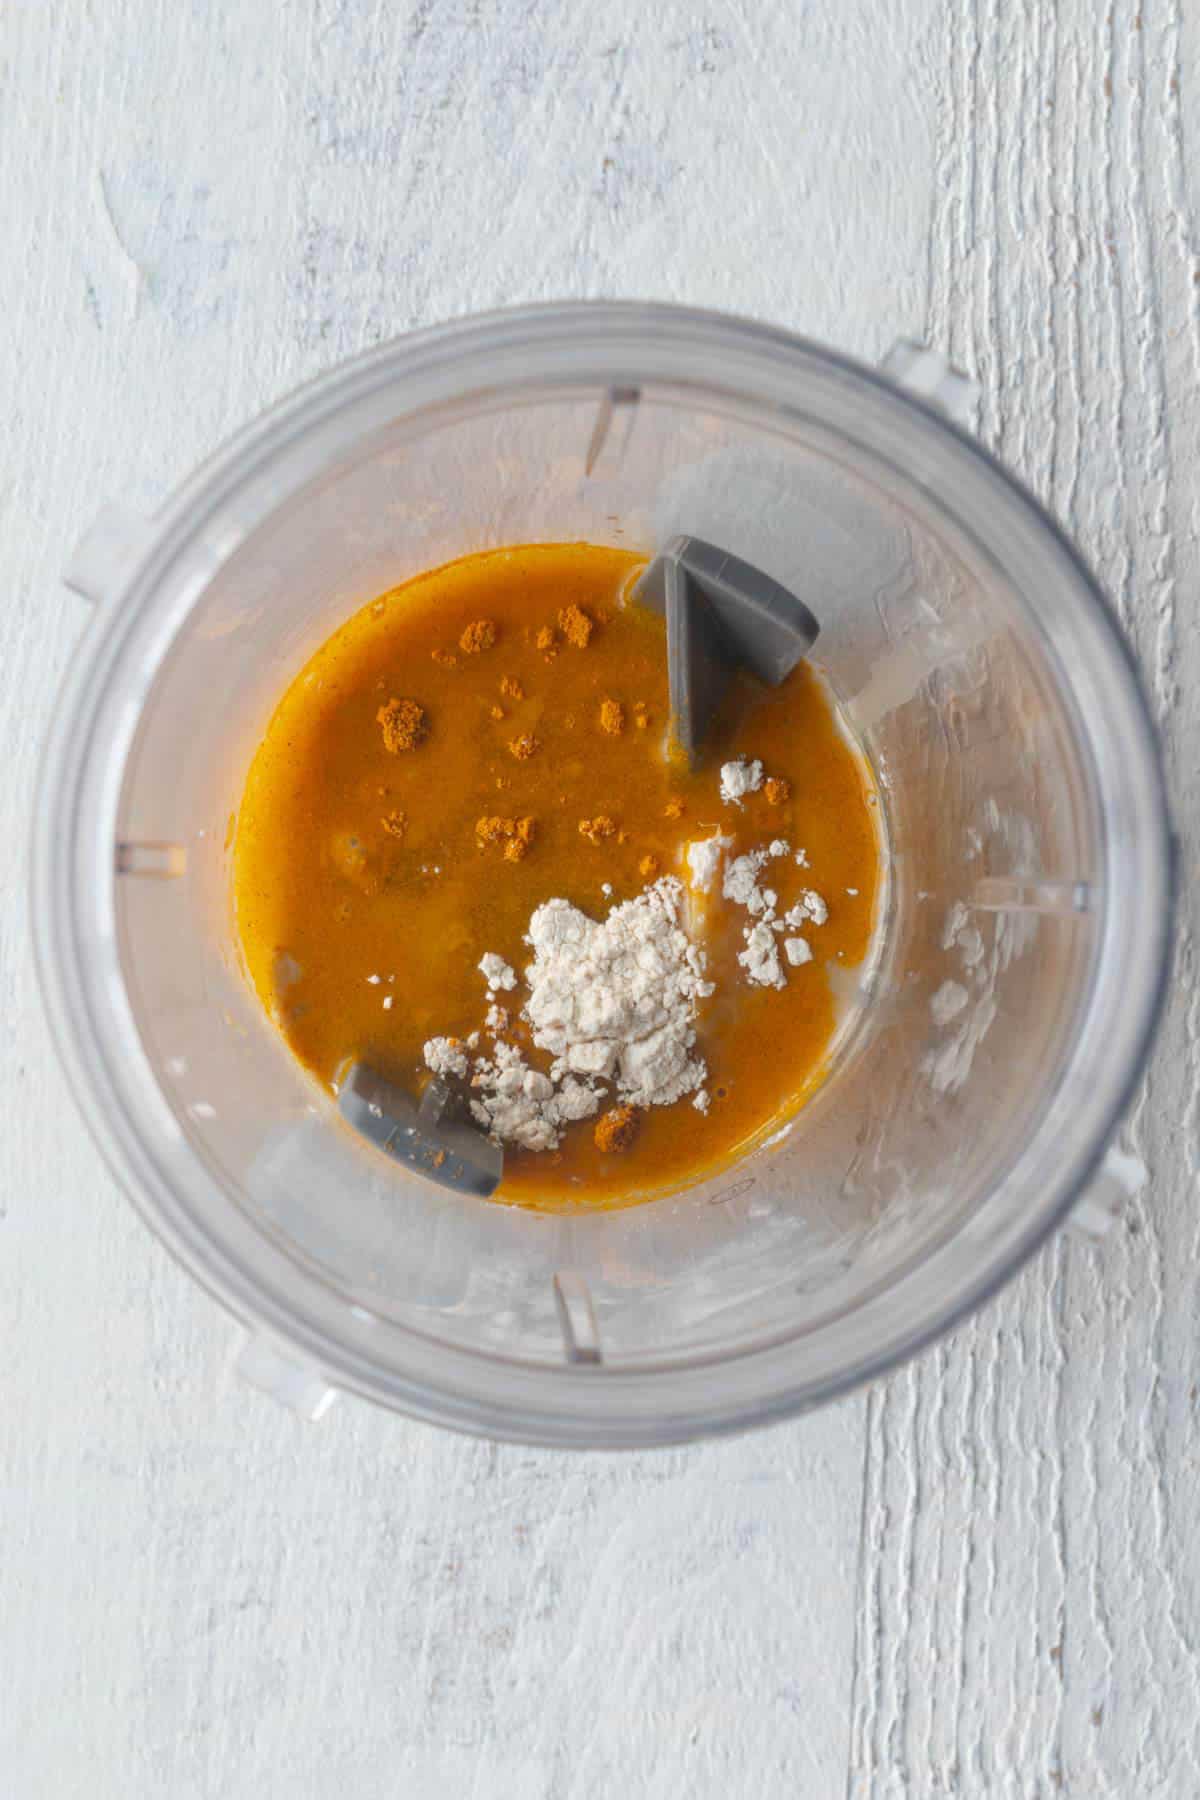 Turmeric, tahini, garlic powder, curry powder and ginger in the canister of a blender.